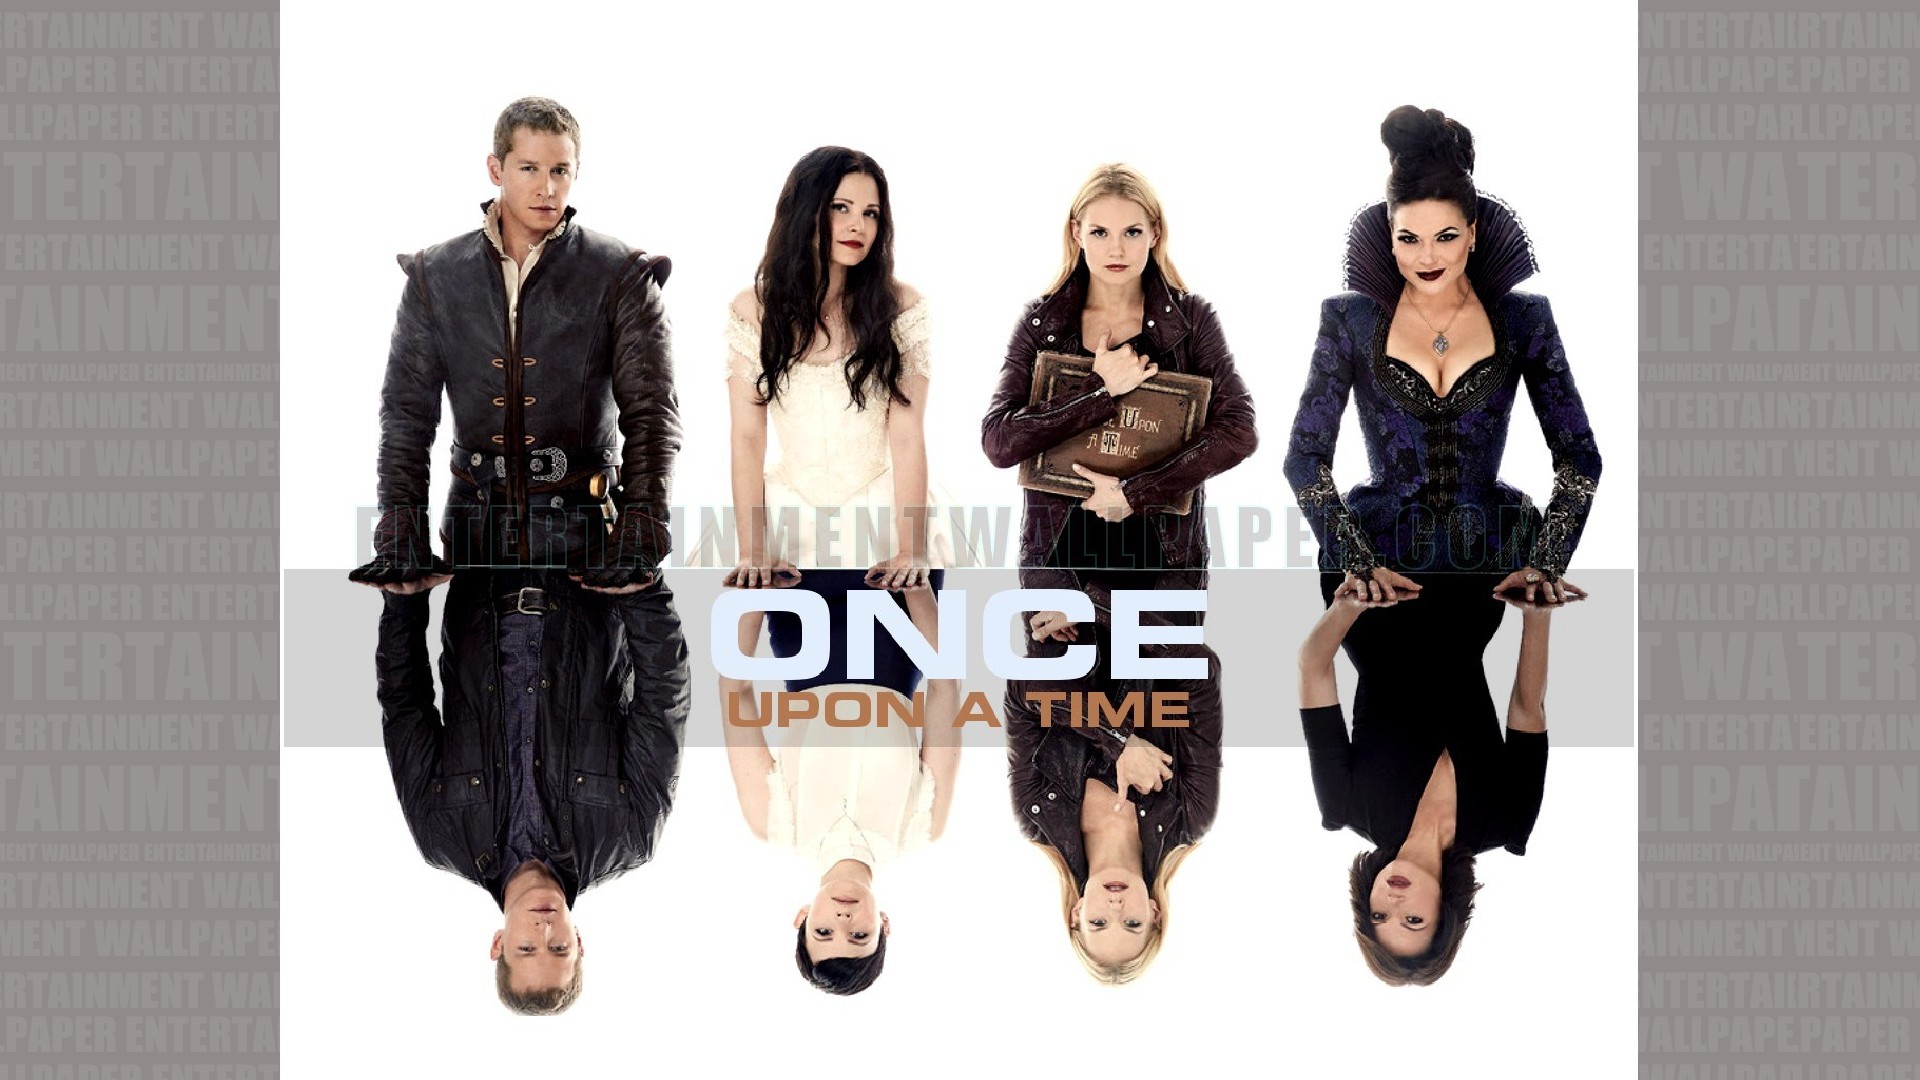 Once Upon a Time Wallpaper – Original size, download now.